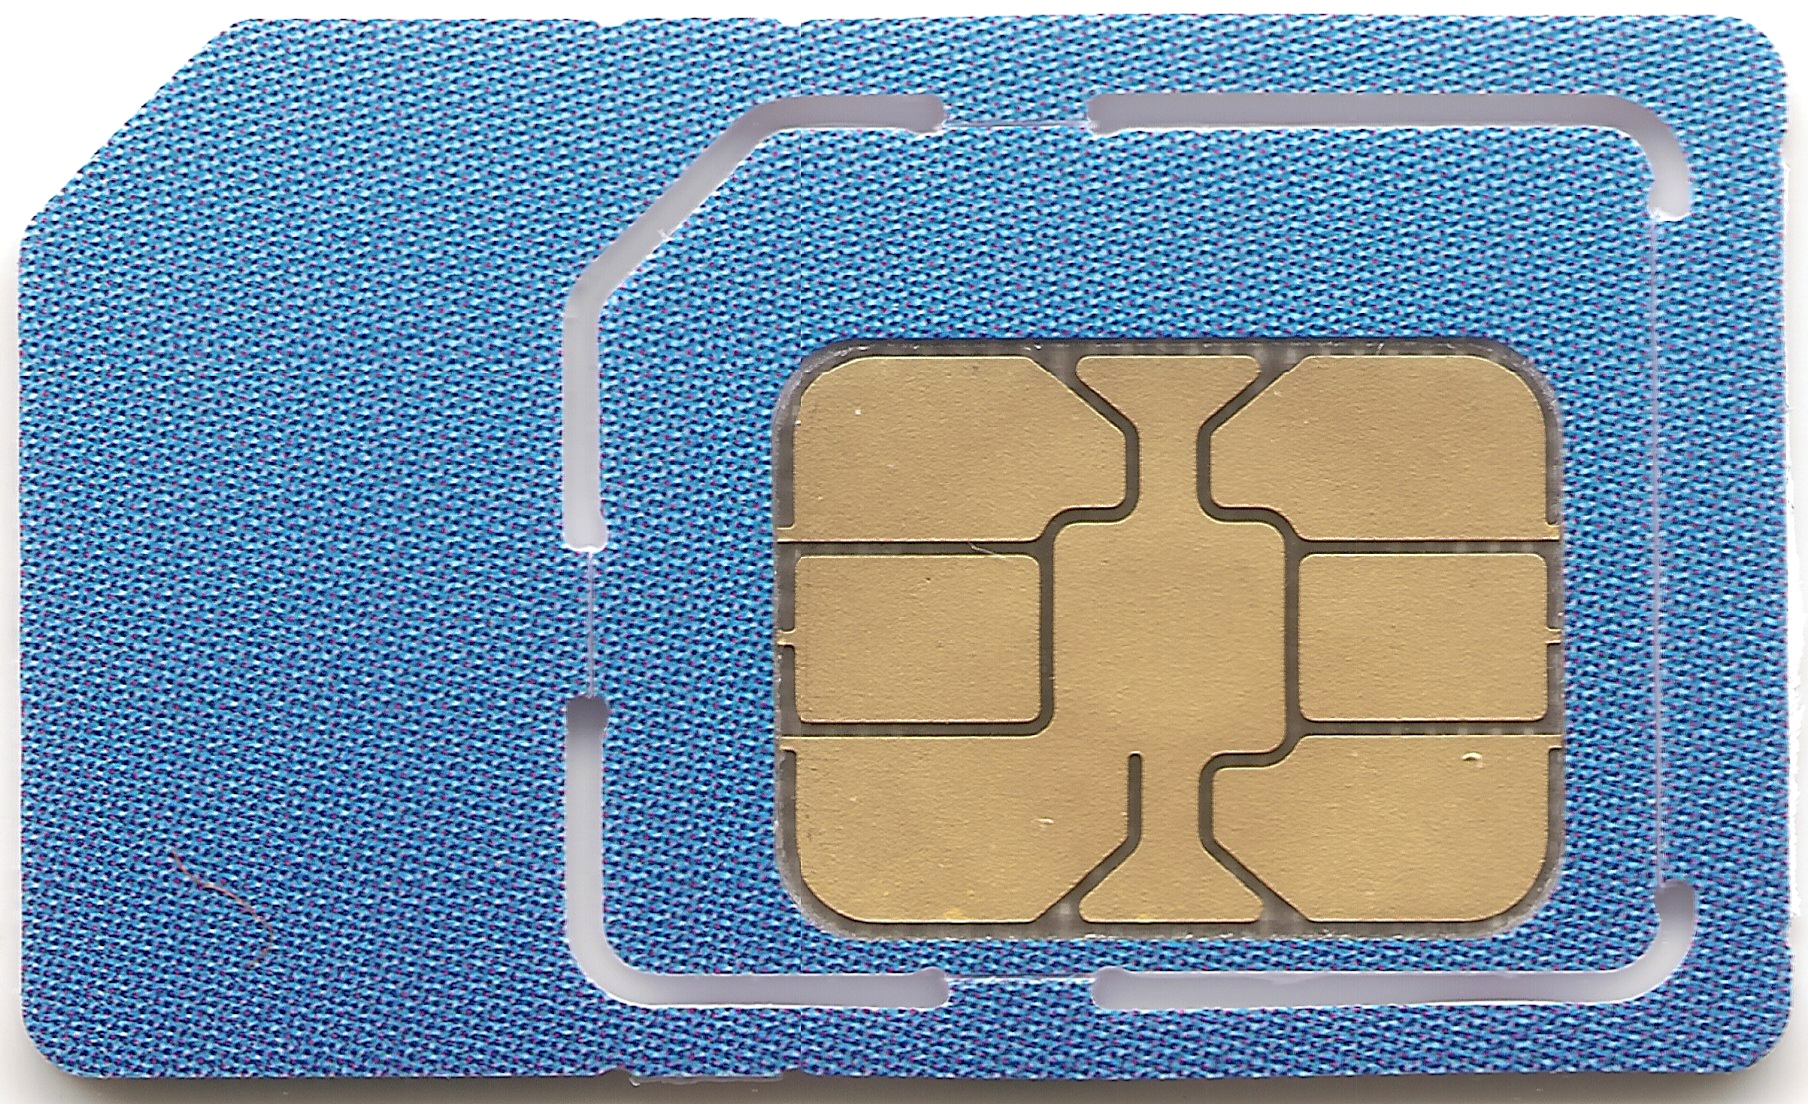 What is SIM Processor on Android?